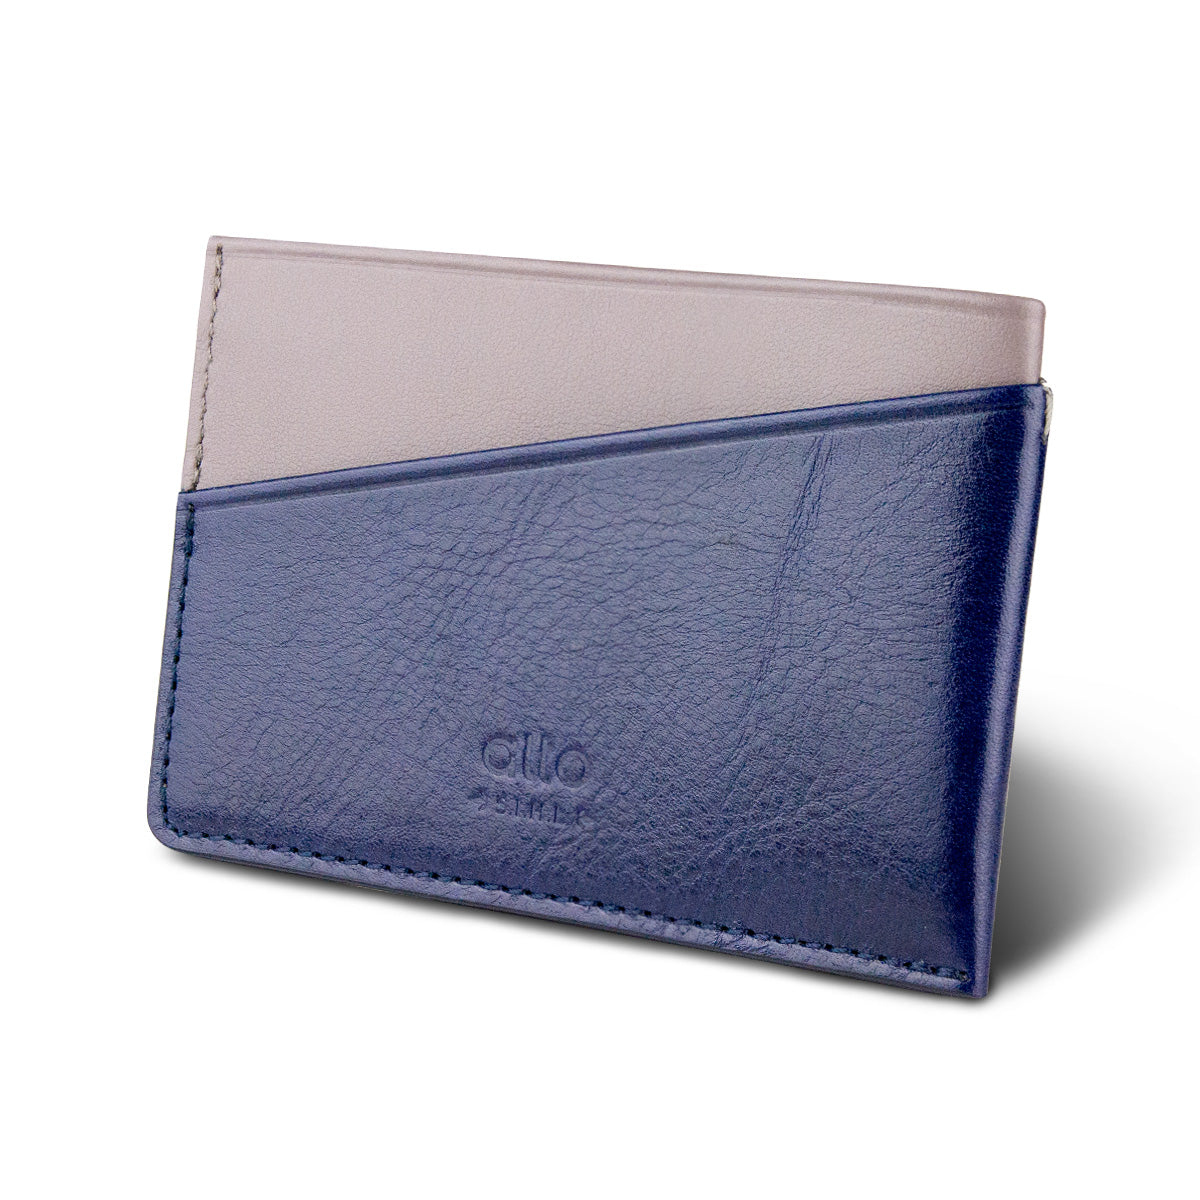 Leather Card Holder – Navy Blue/Cement Gray